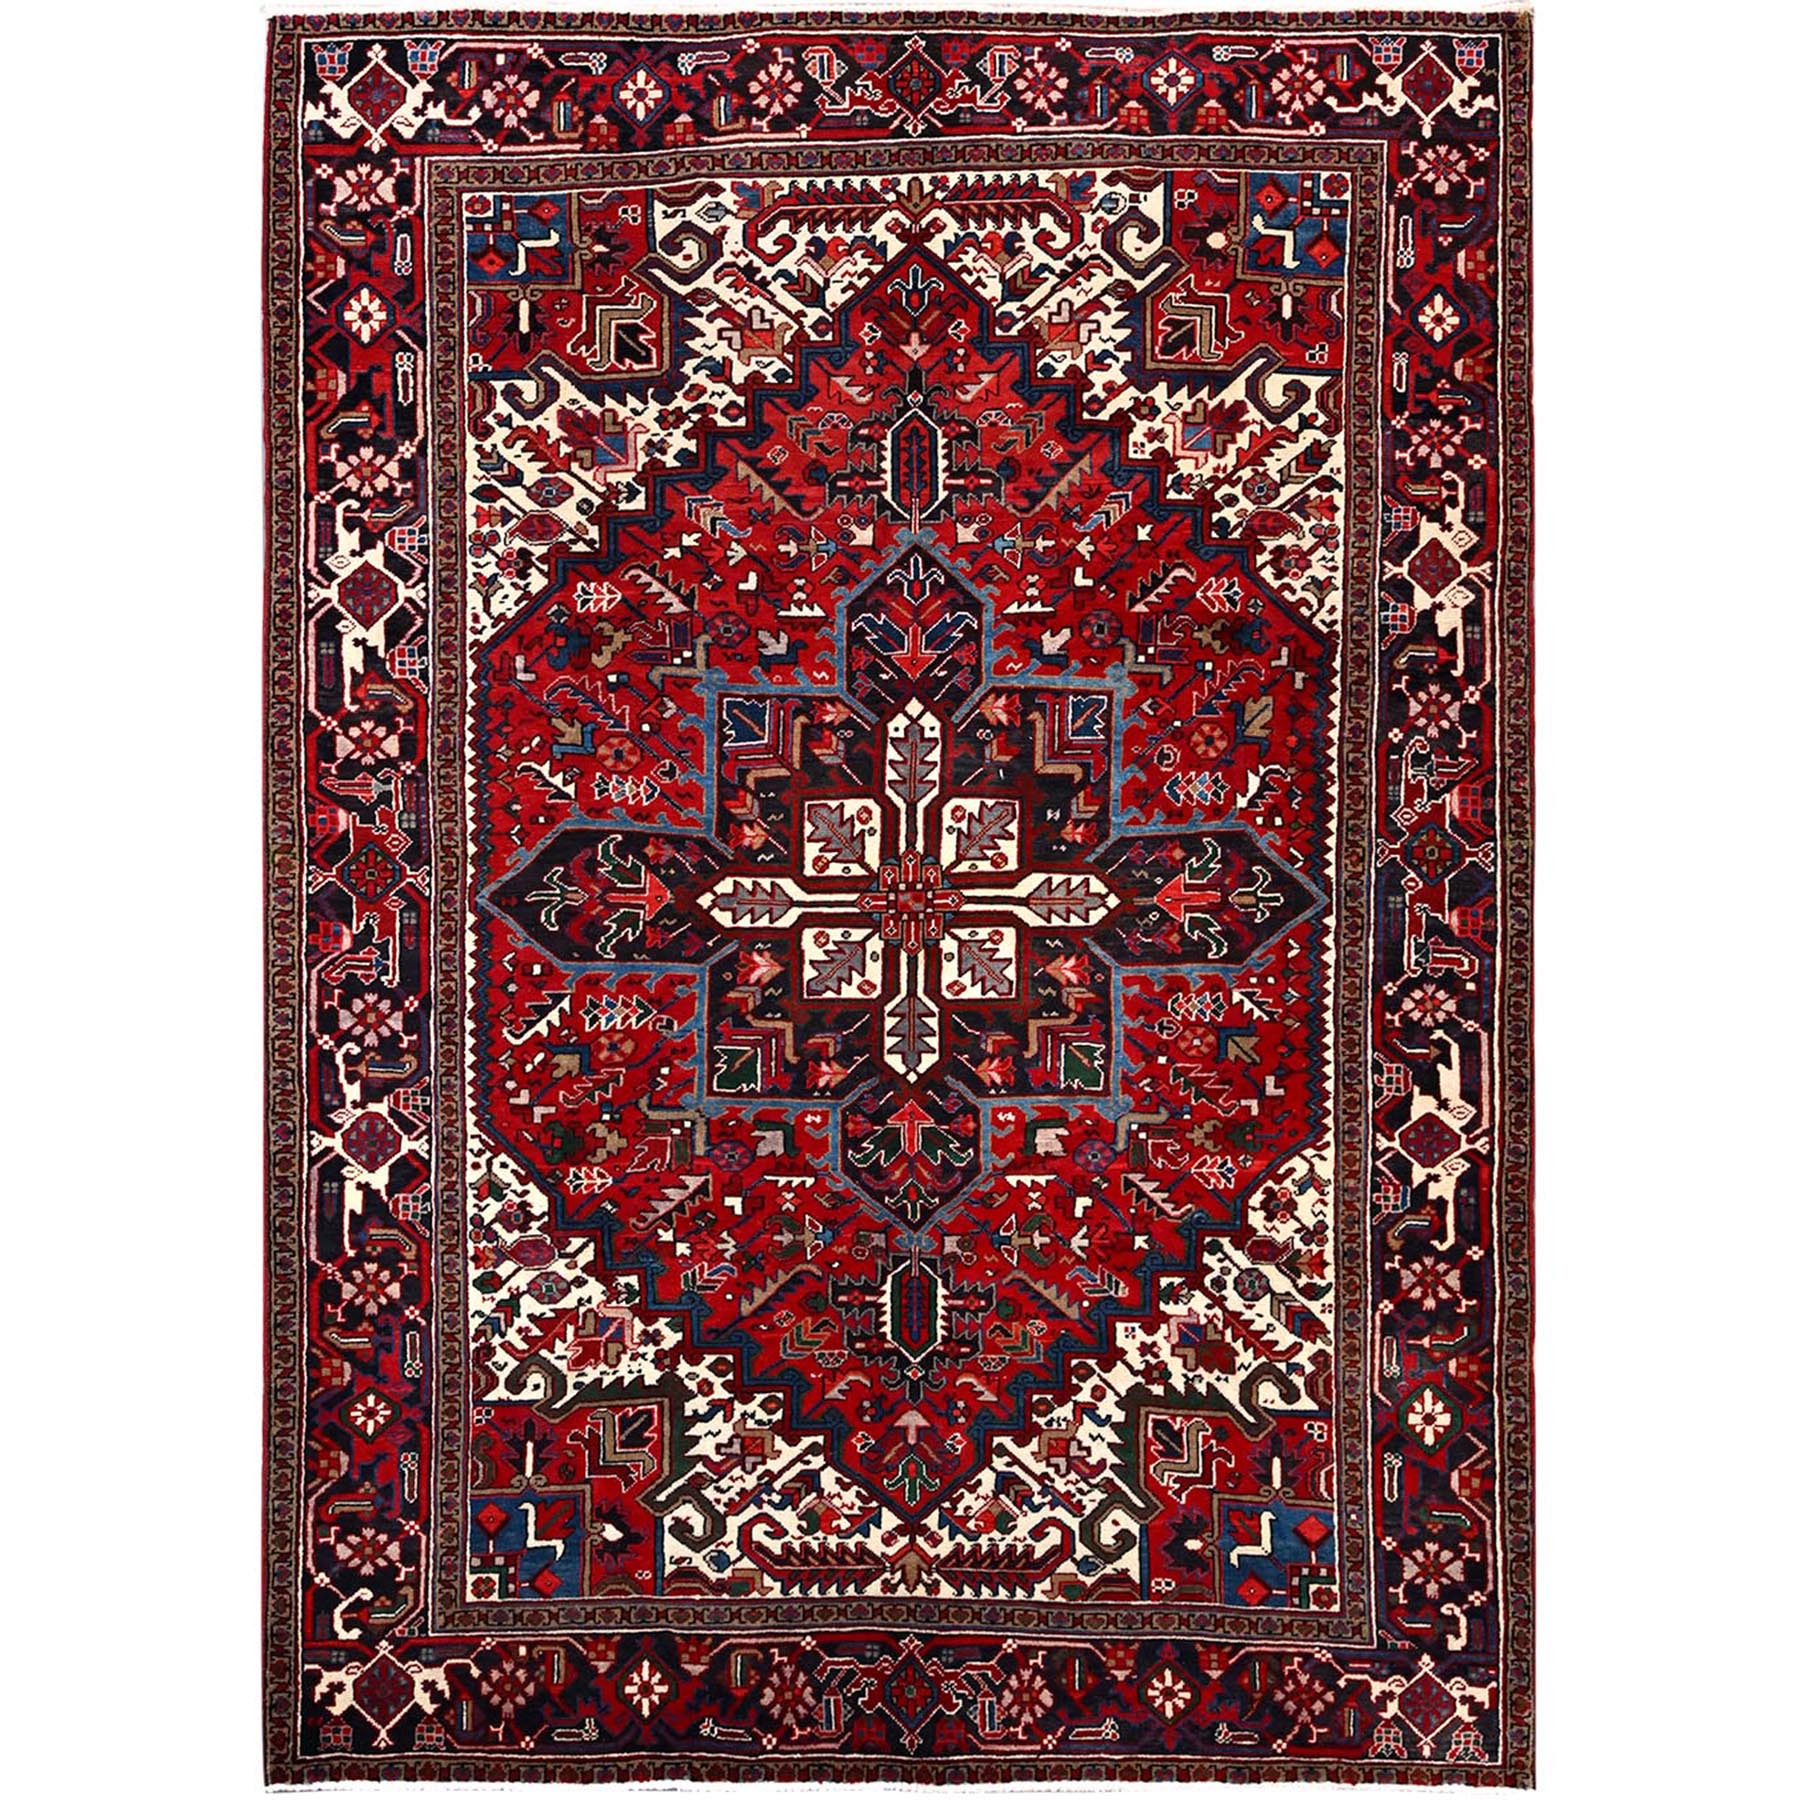  Wool Hand-Knotted Area Rug 6'9